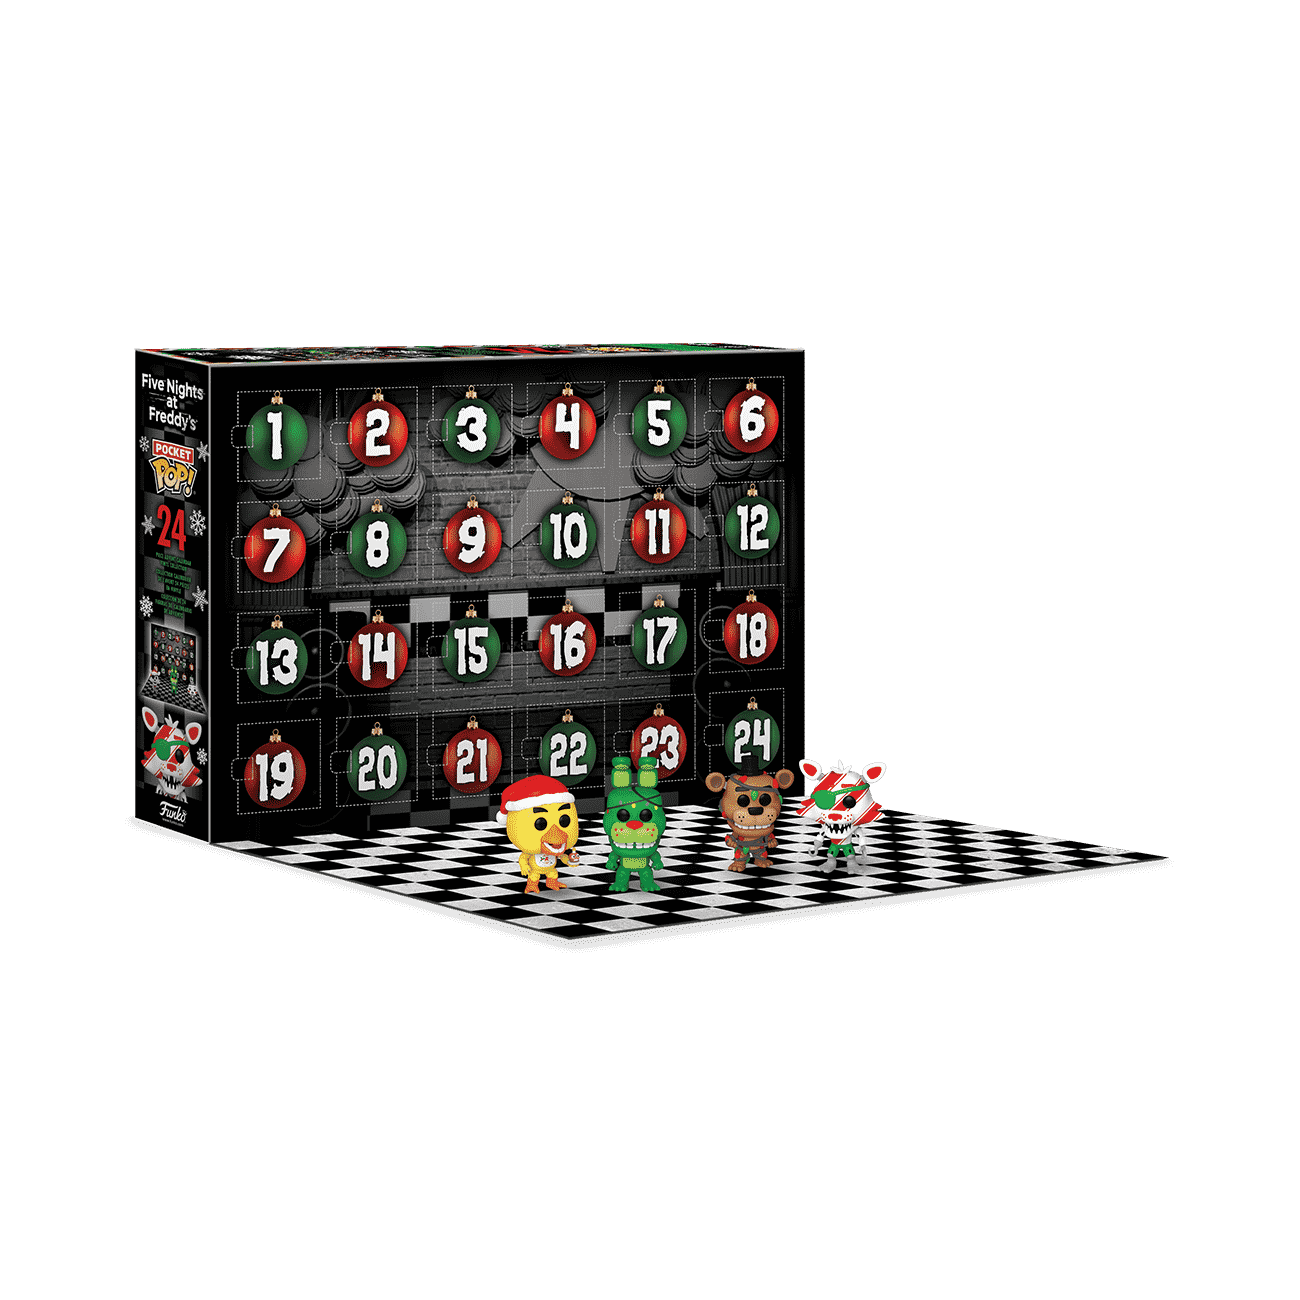 Buy Pocket Pop! Five Nights at Freddy's 24Day Holiday Advent Calendar